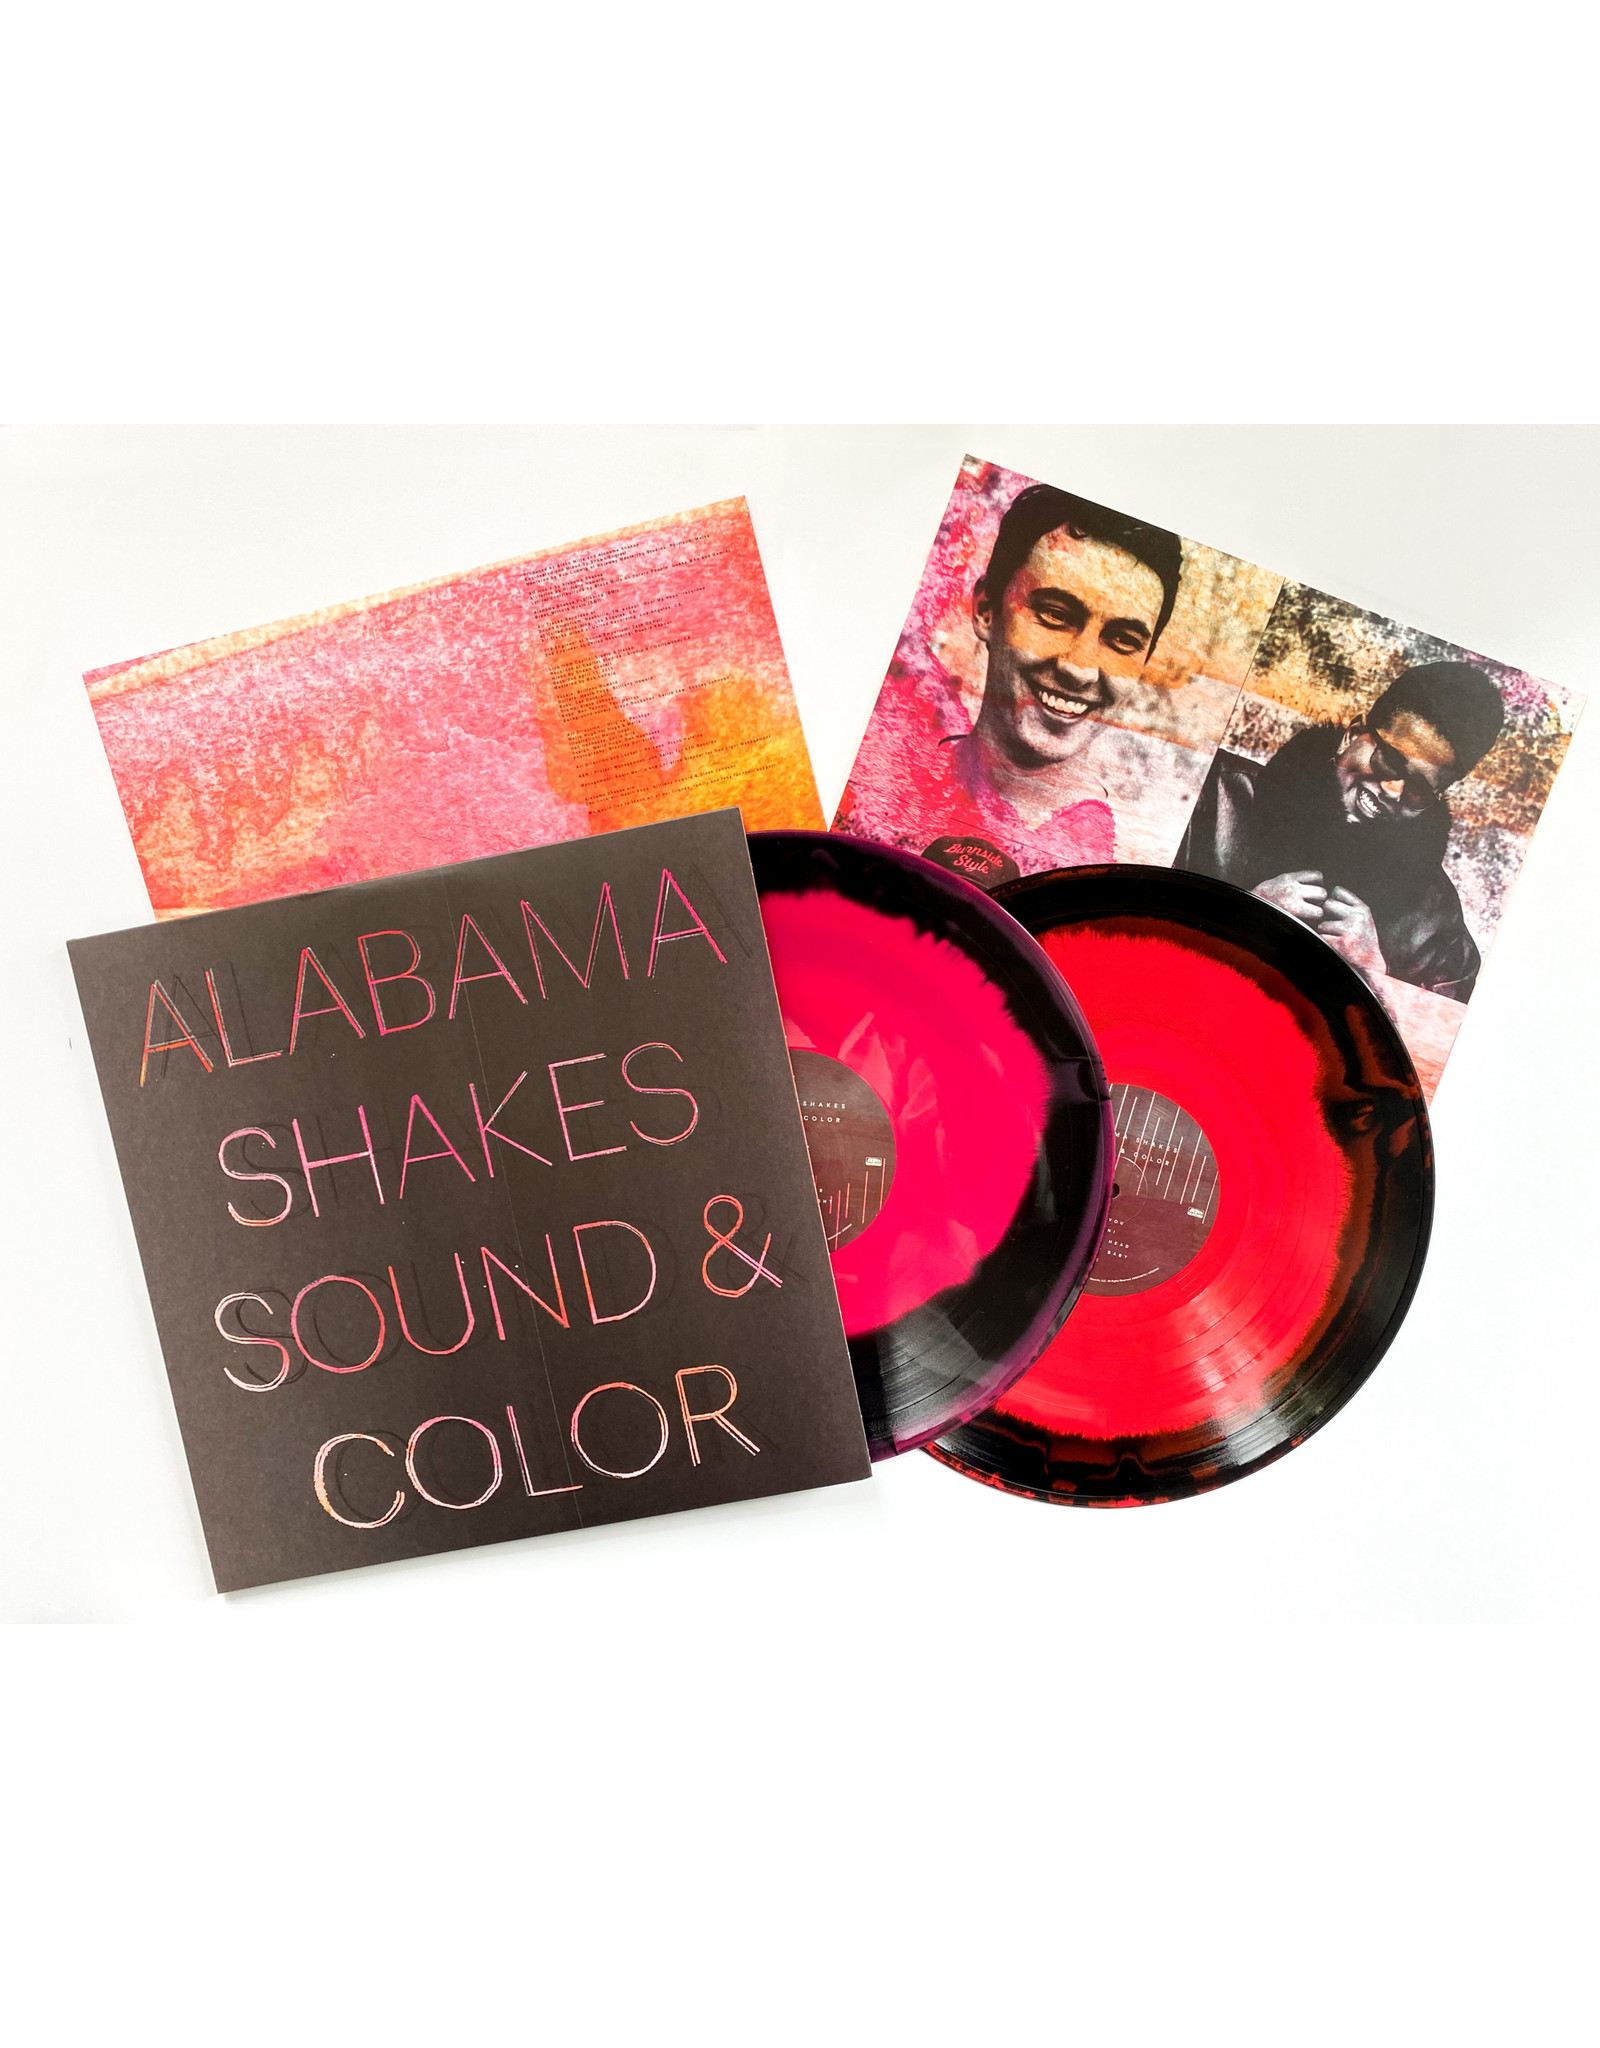 Alabama Shakes - Sound and Color (Deluxe Edition) [Colour Vinyl]